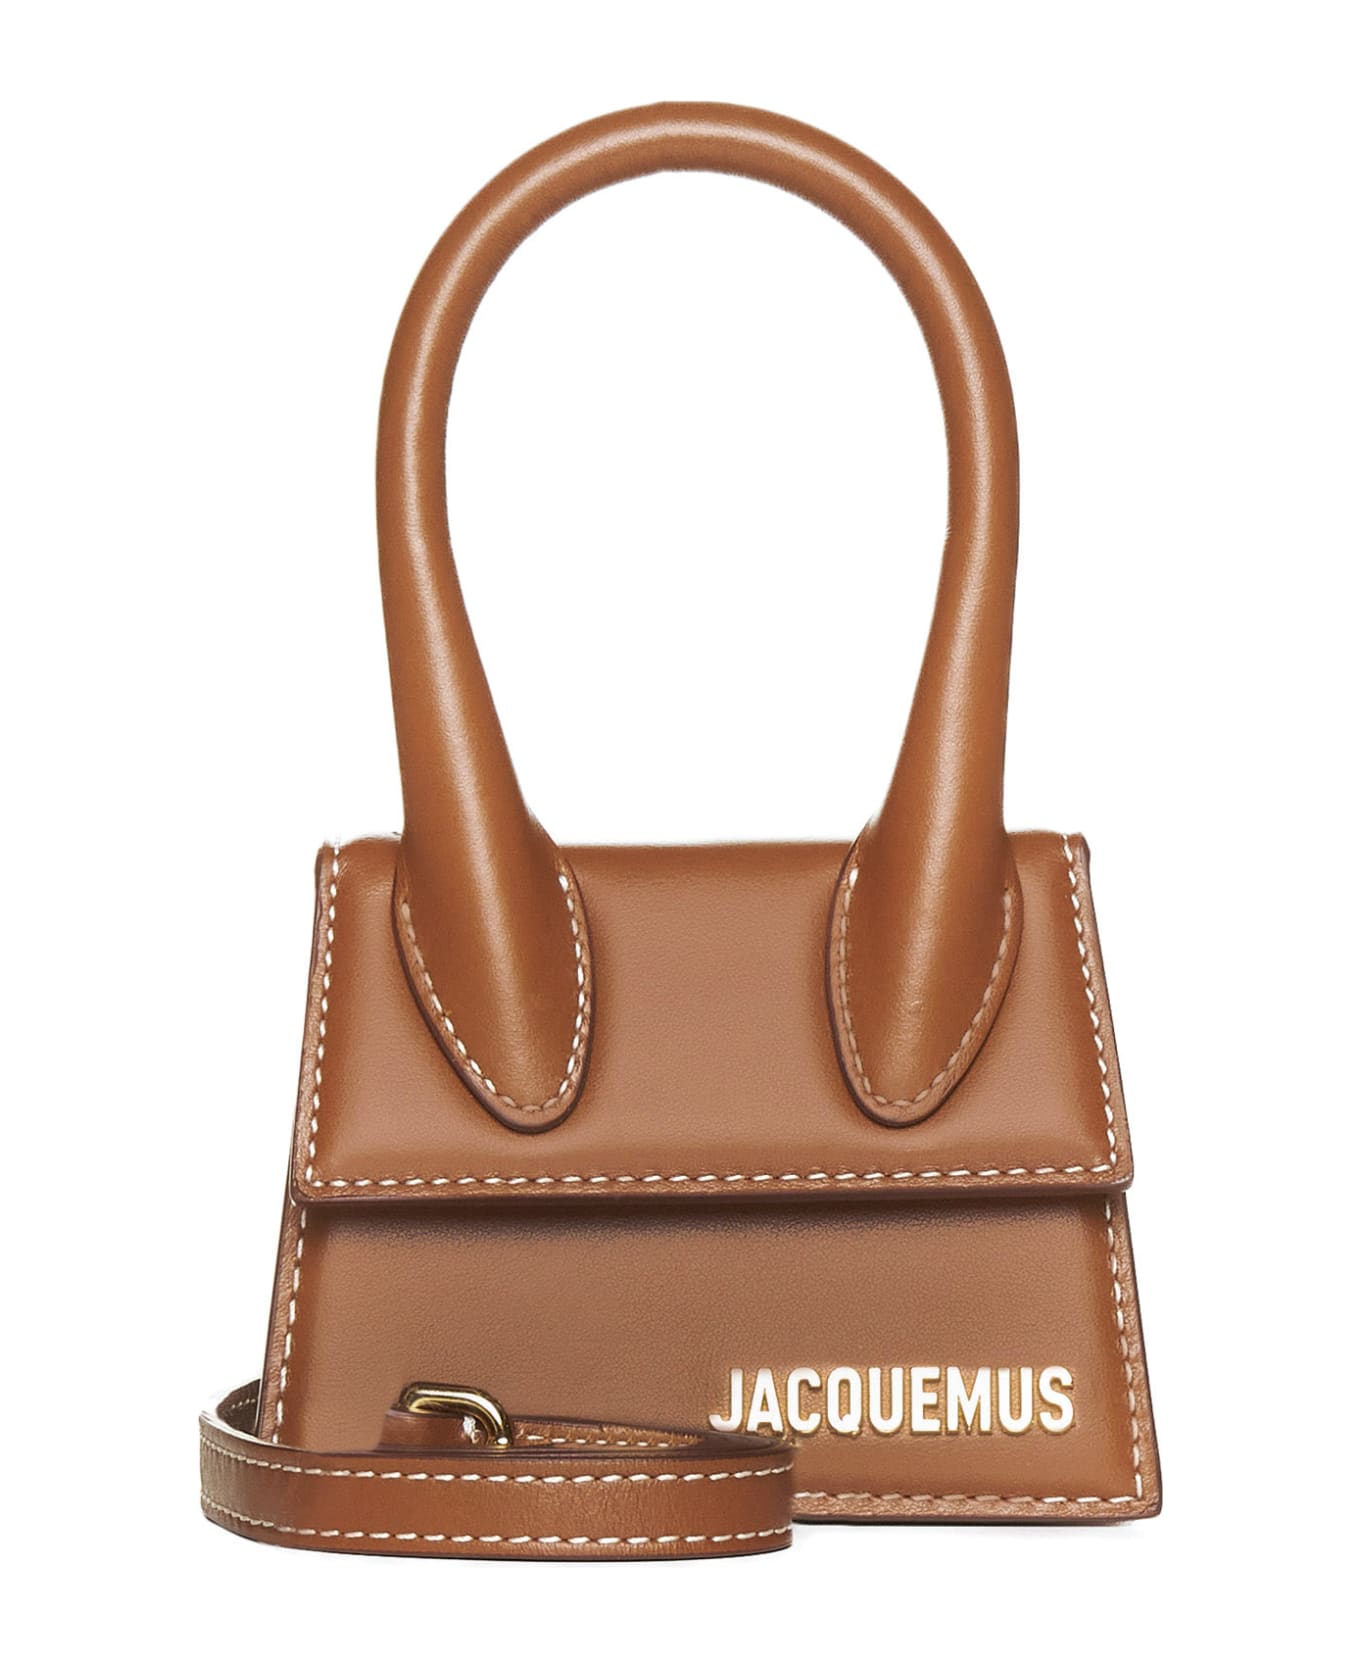 Jacquemus Le Chiquito Leather Mini Bag - Light brown トートバッグ